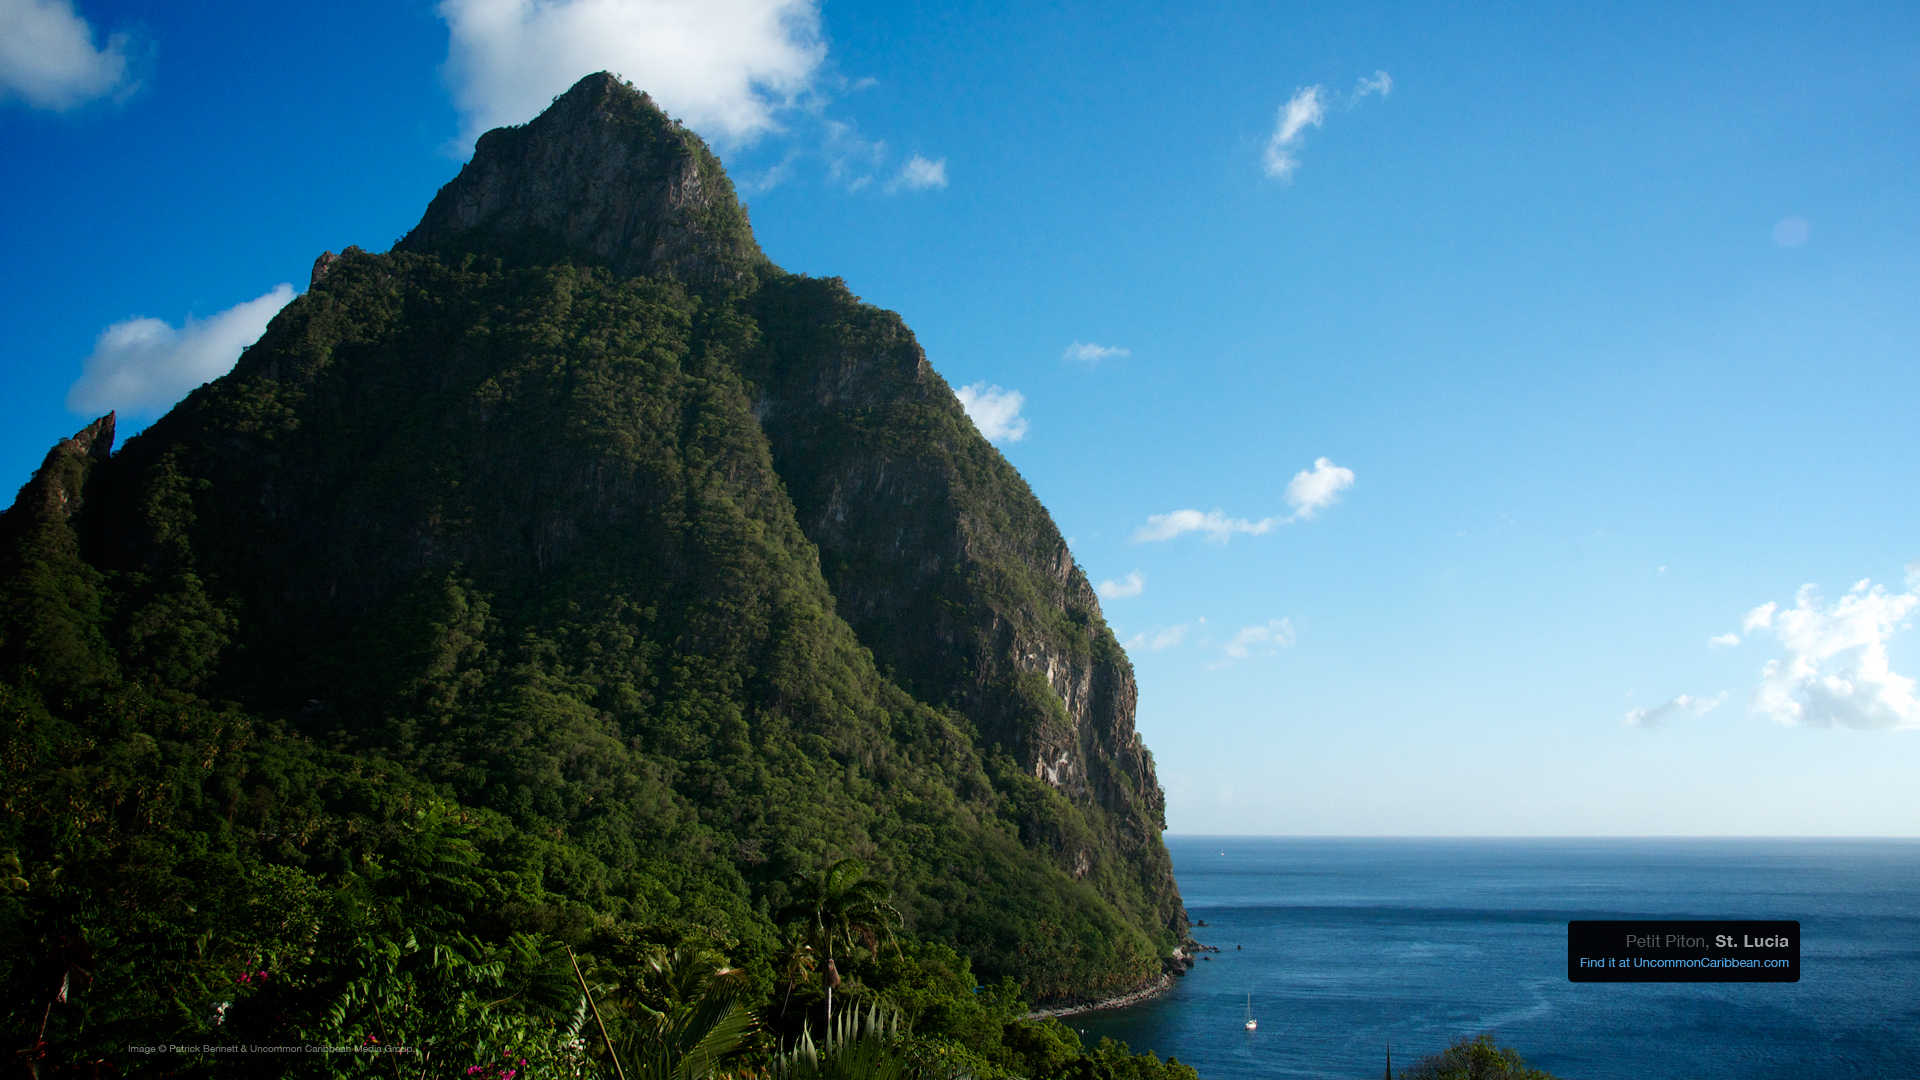 Wallpaper Wednesday Petit Piton St Lucia Featuring T Pain